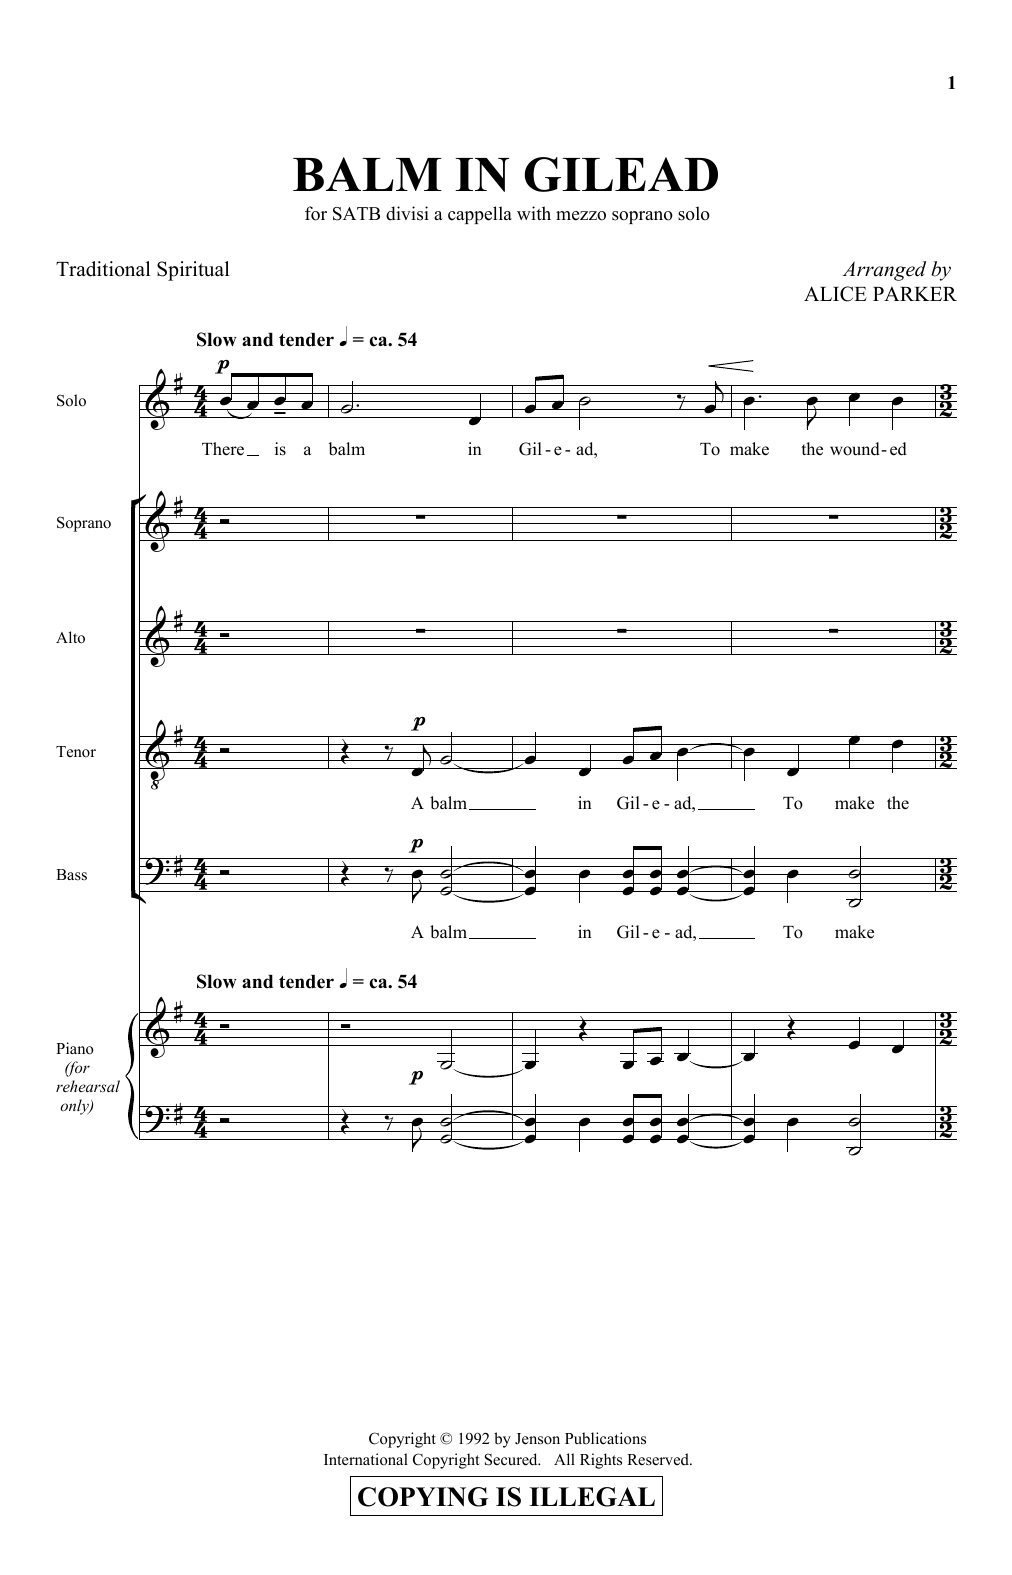 Download Traditional Spiritual Balm In Gilead (arr. Alice Parker) Sheet Music